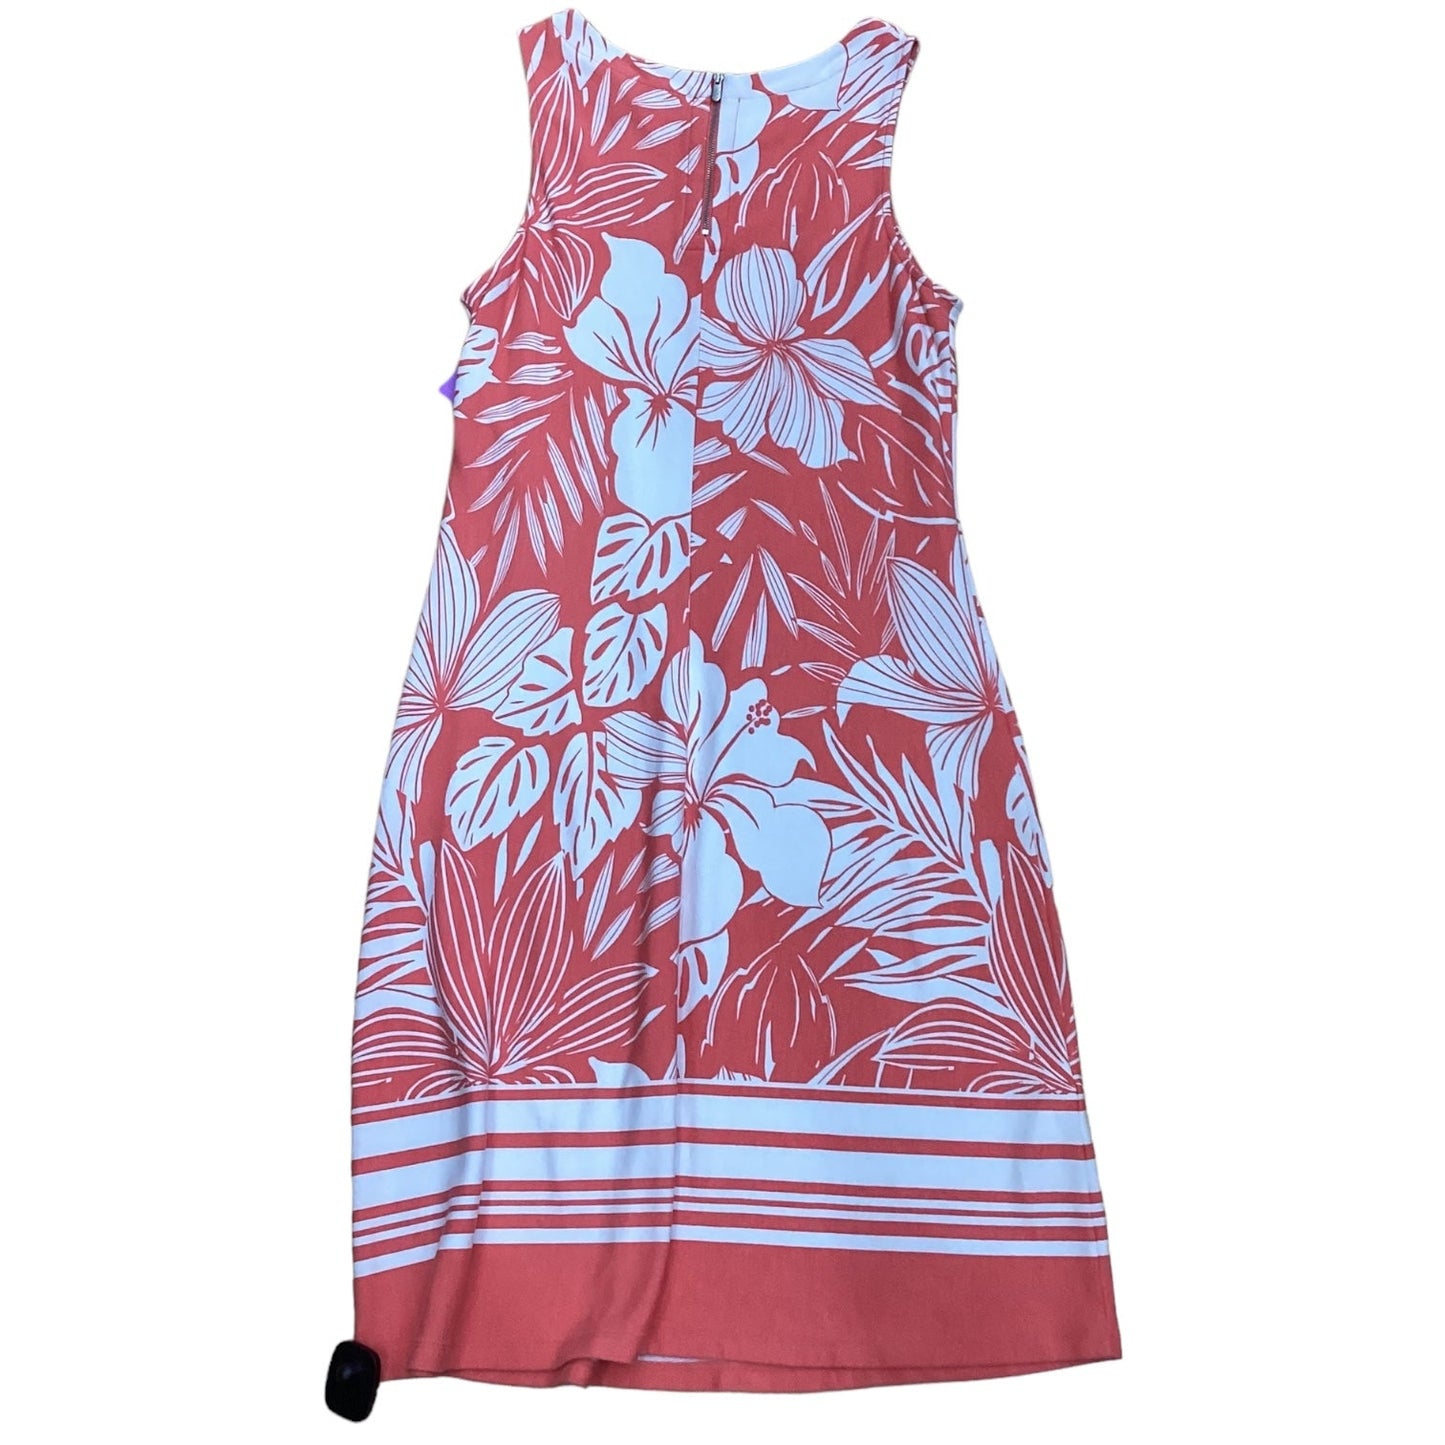 Coral Dress Casual Short Tommy Bahama, Size Xl